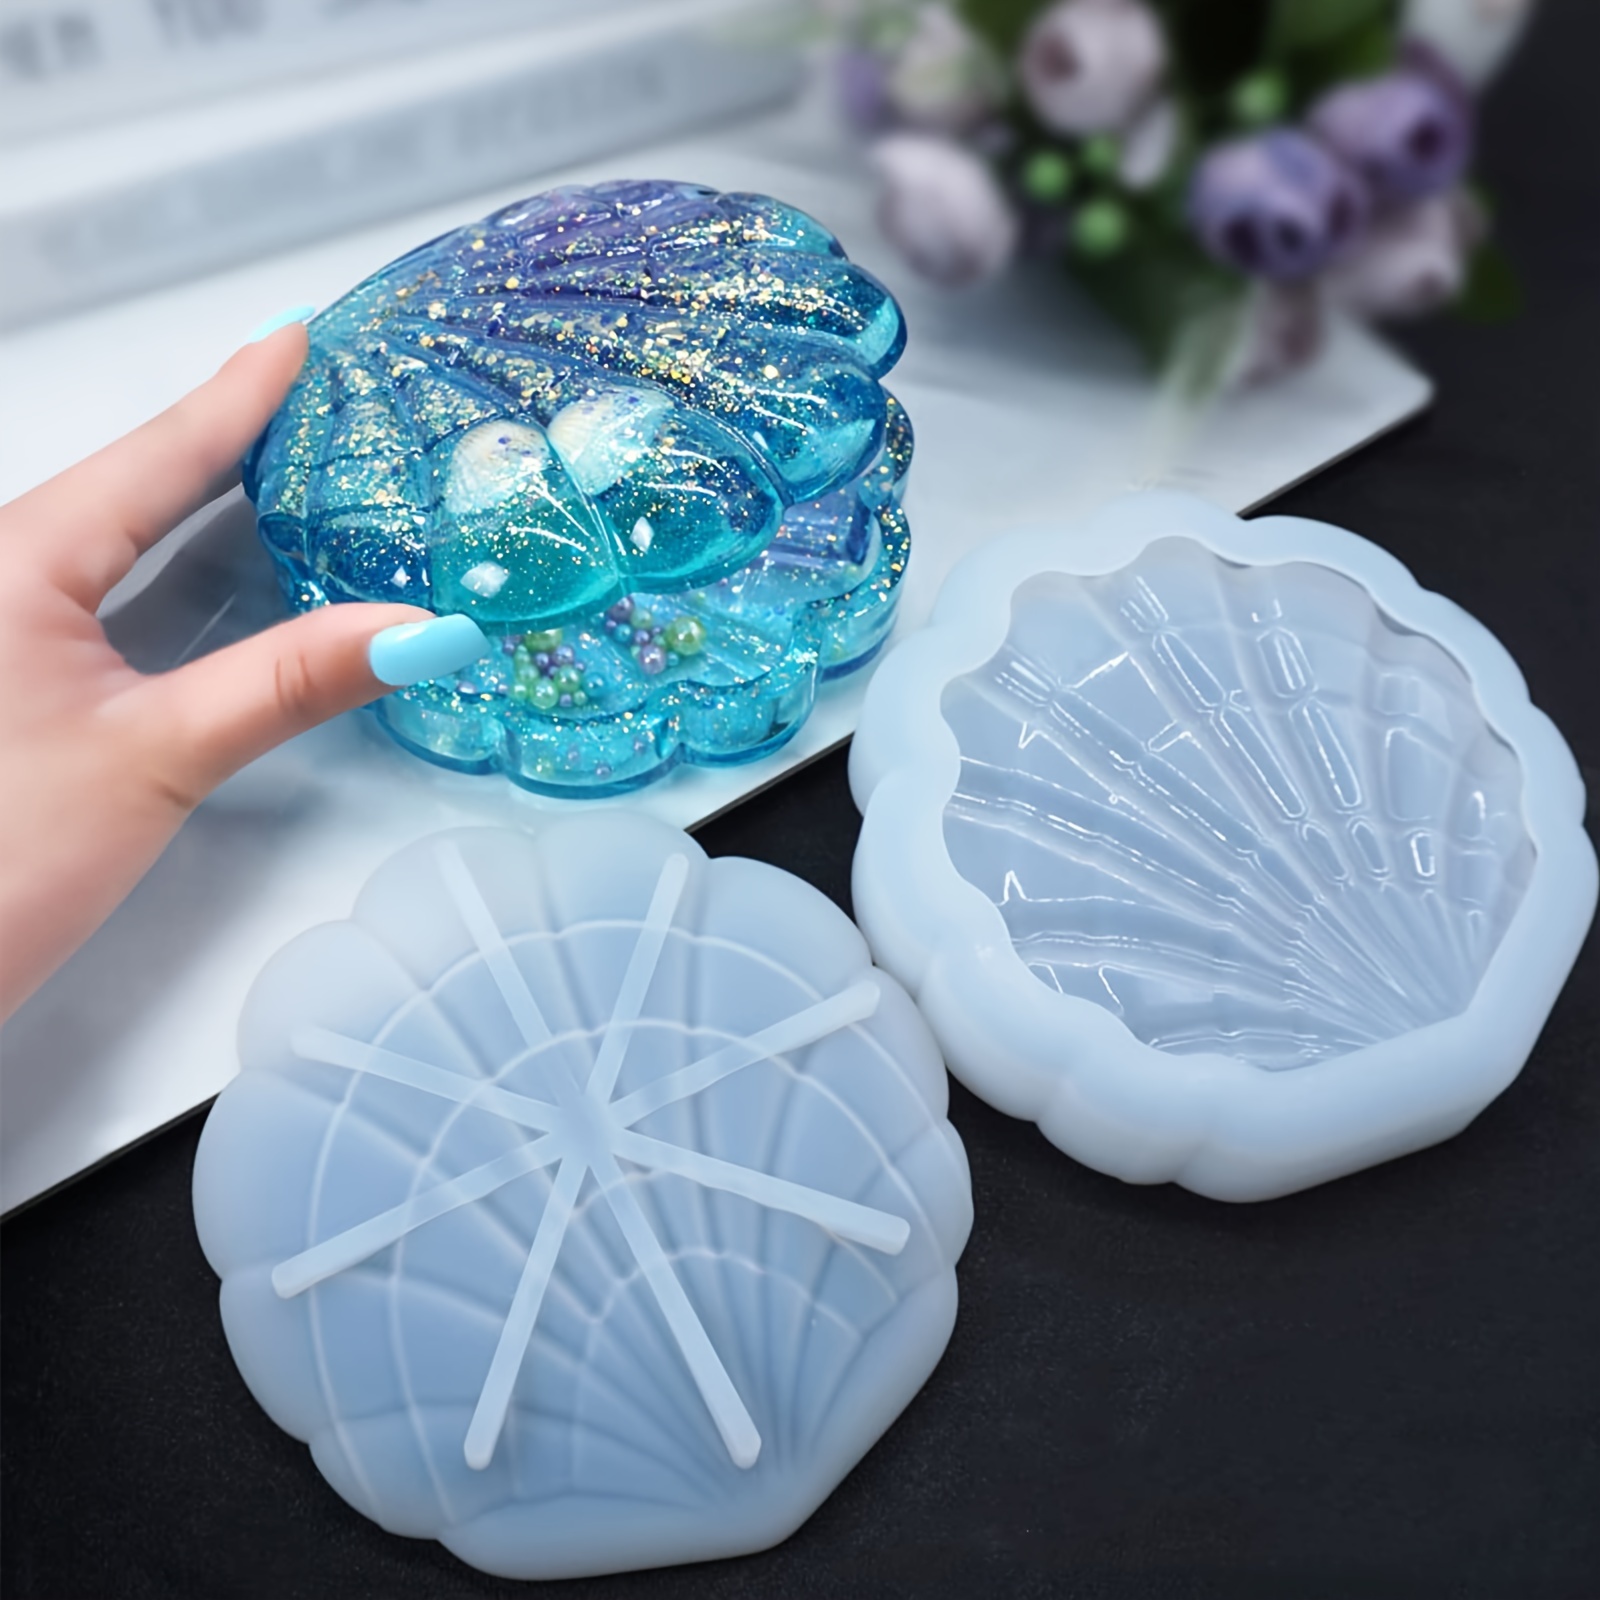 Box Resin Molds, Jewelry Box Molds with Heart Shape Silicone Resin Mold,  Hexagon Storage Box Mold and Square Epoxy Molds for Making Resin Molds